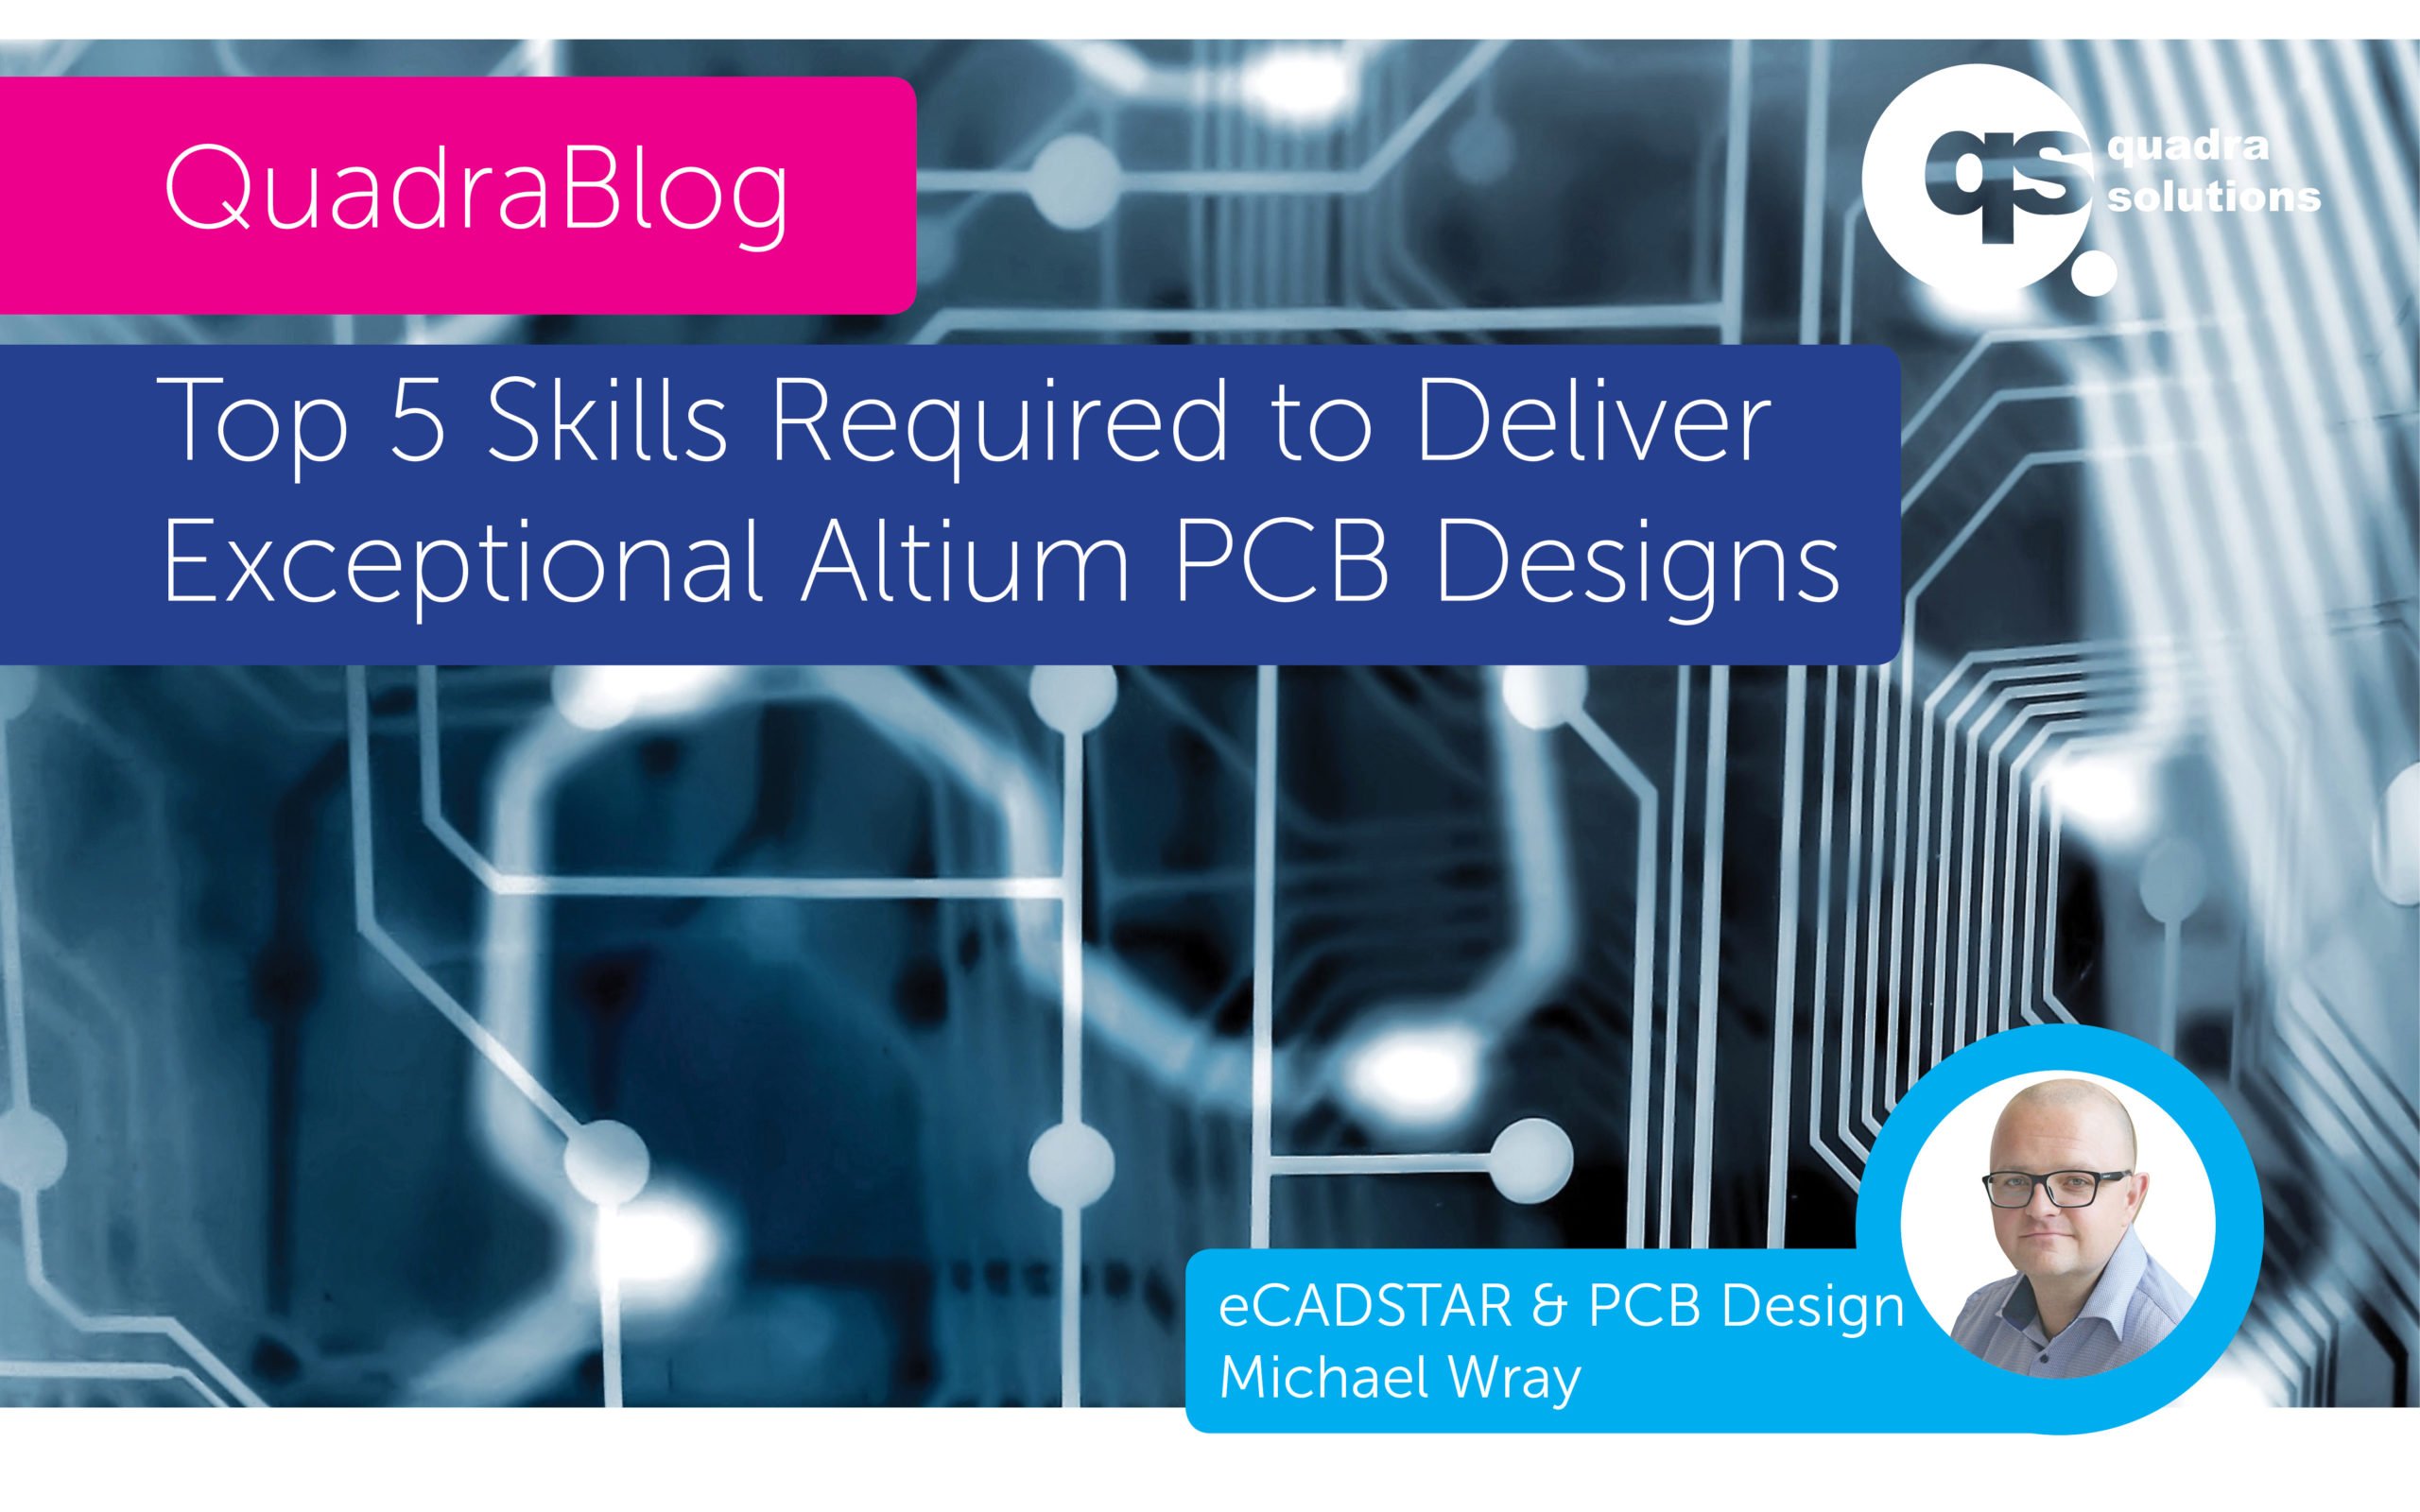 Top 5 Skills Required to Deliver Exceptional Altium PCB Design Projects